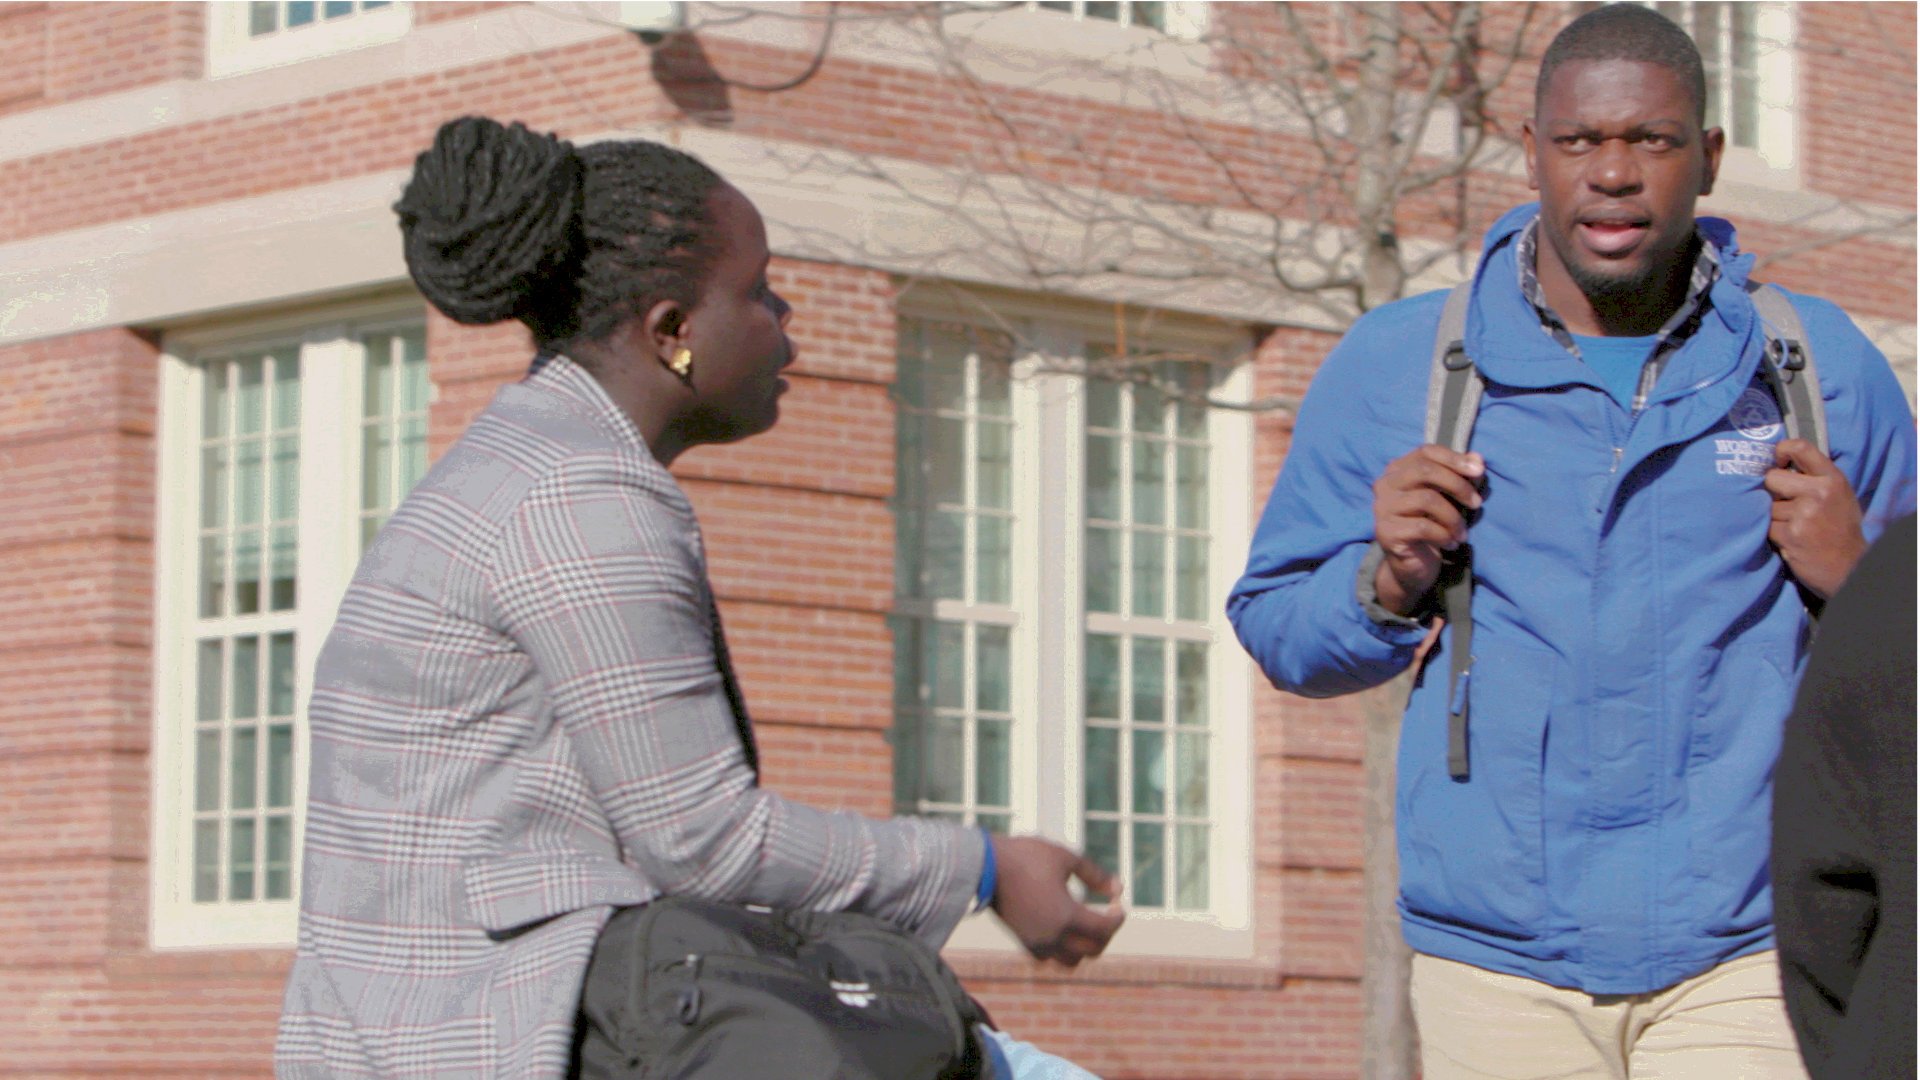 Two Worcester State students engaging in conversation outside on campus